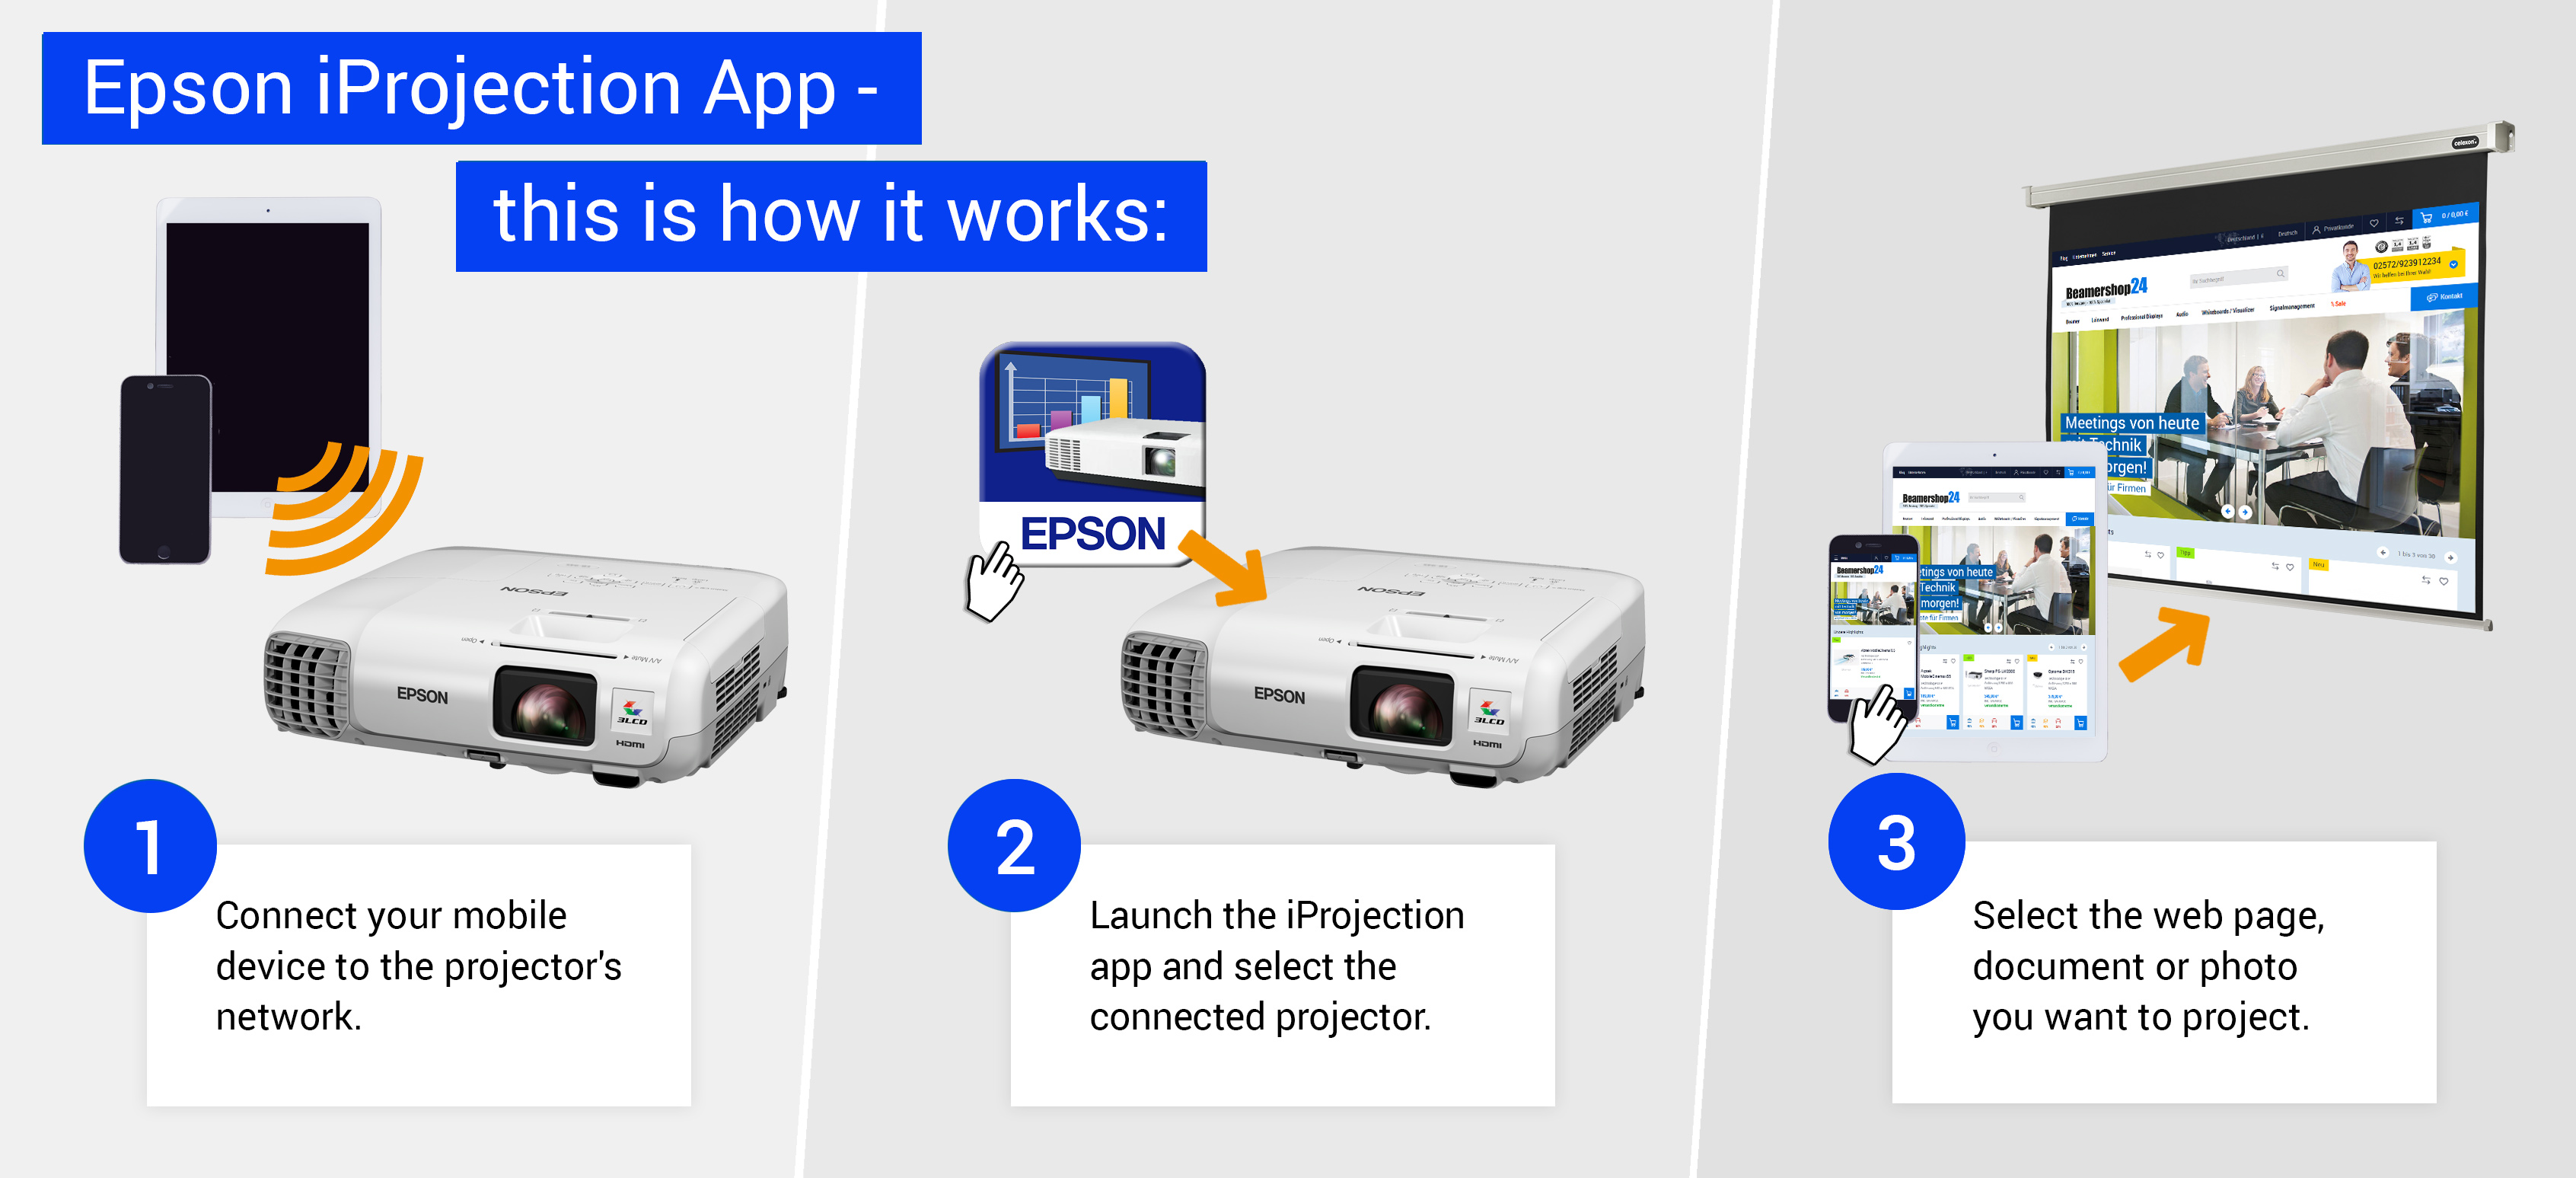 Funktionsweise der Epson iProjection App